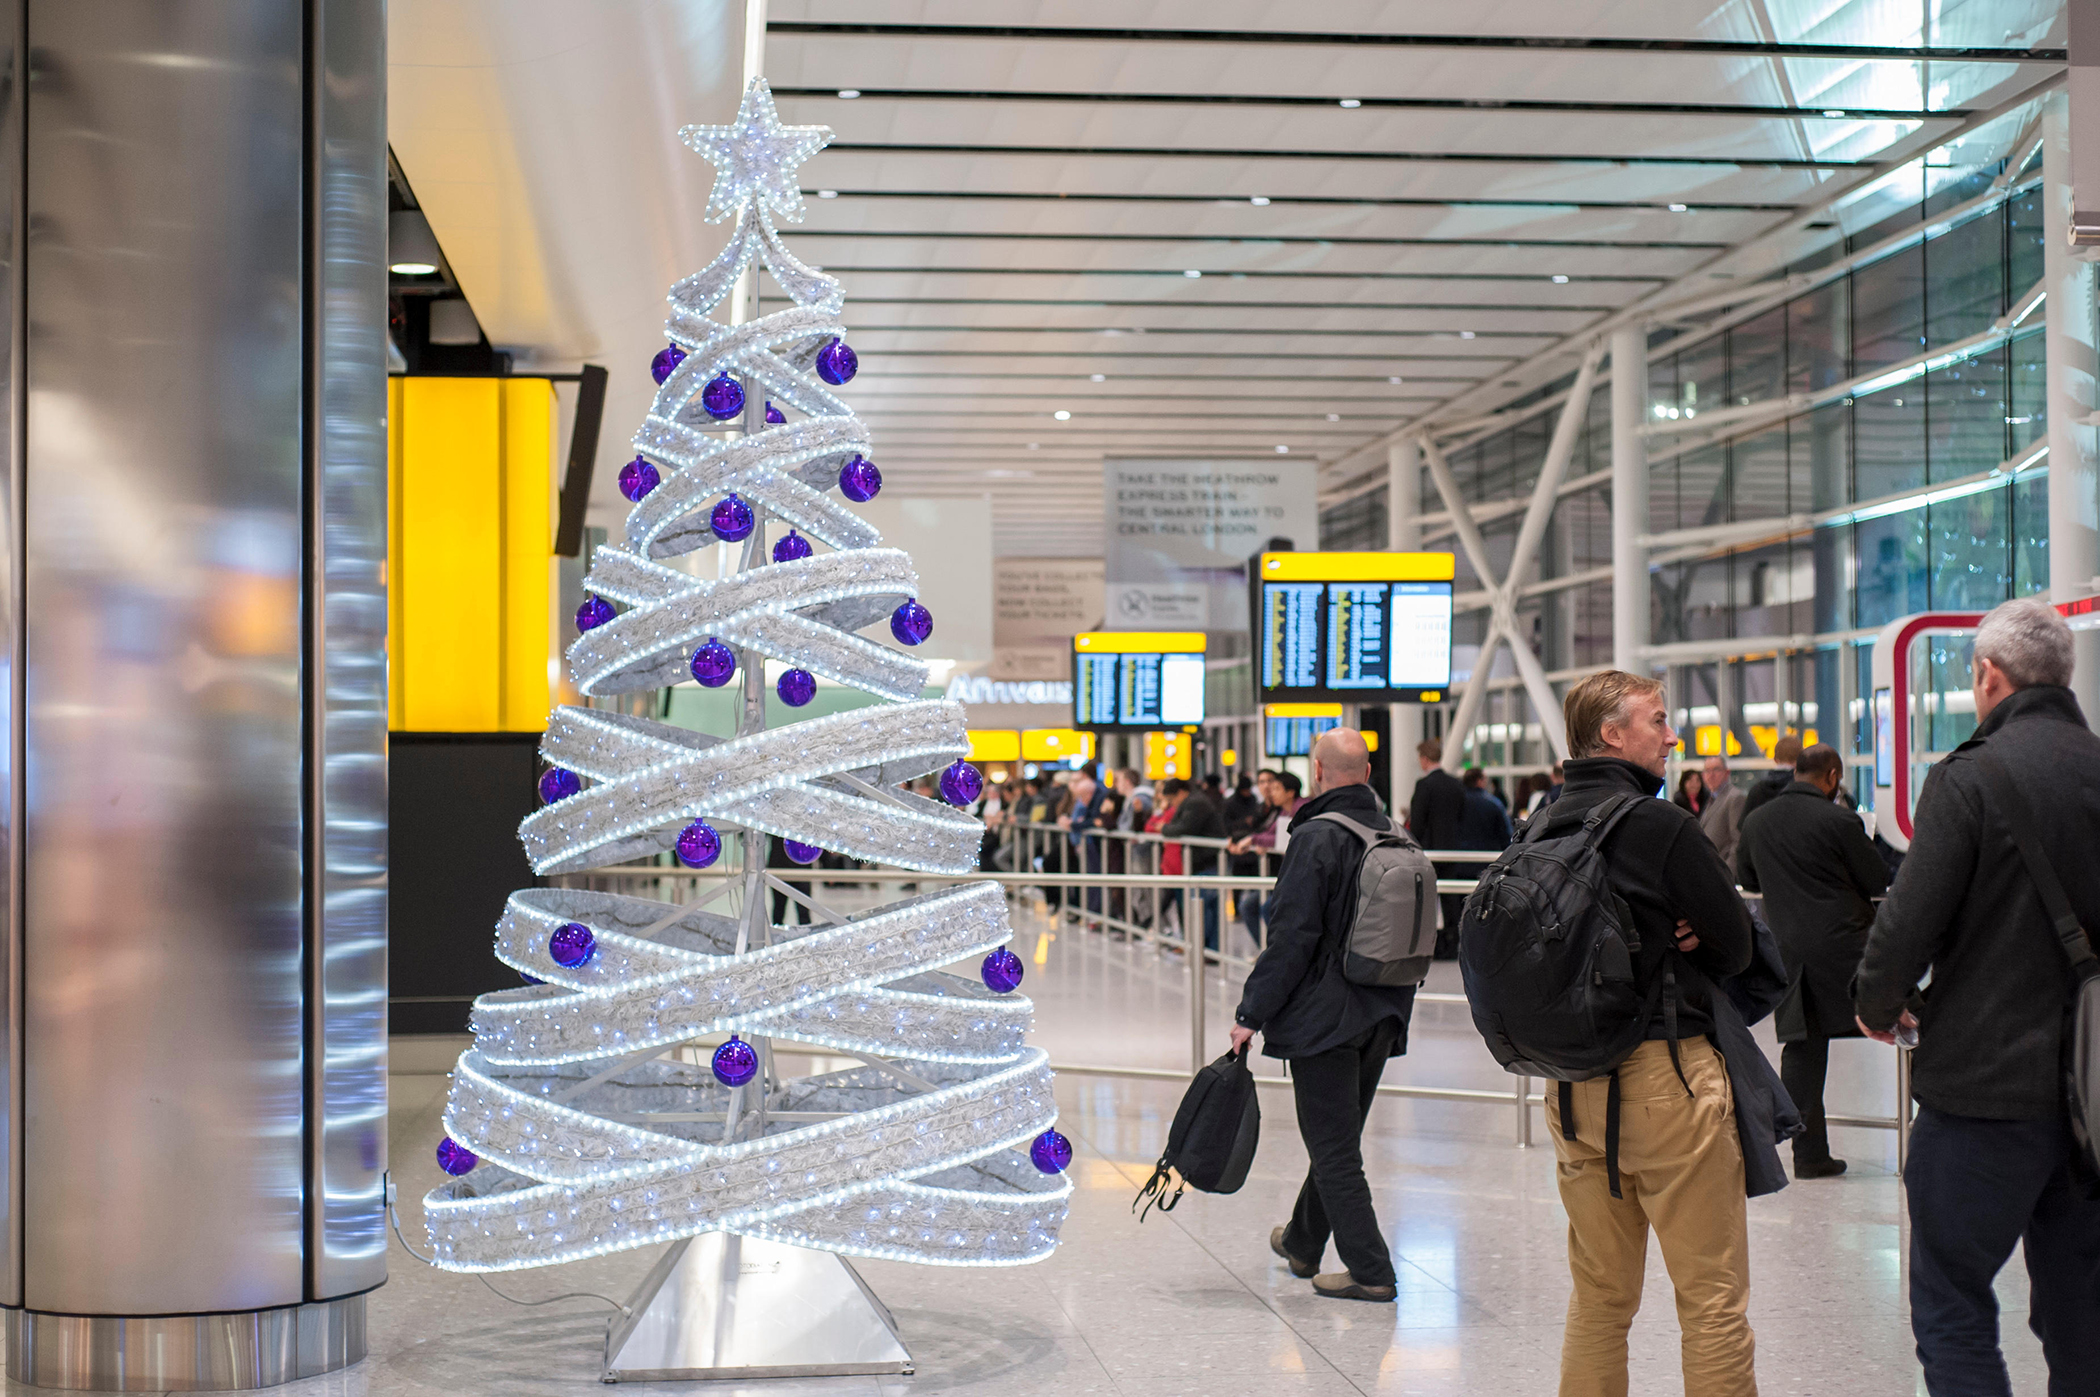 Have You Made Your Holiday Travel Plans Yet?